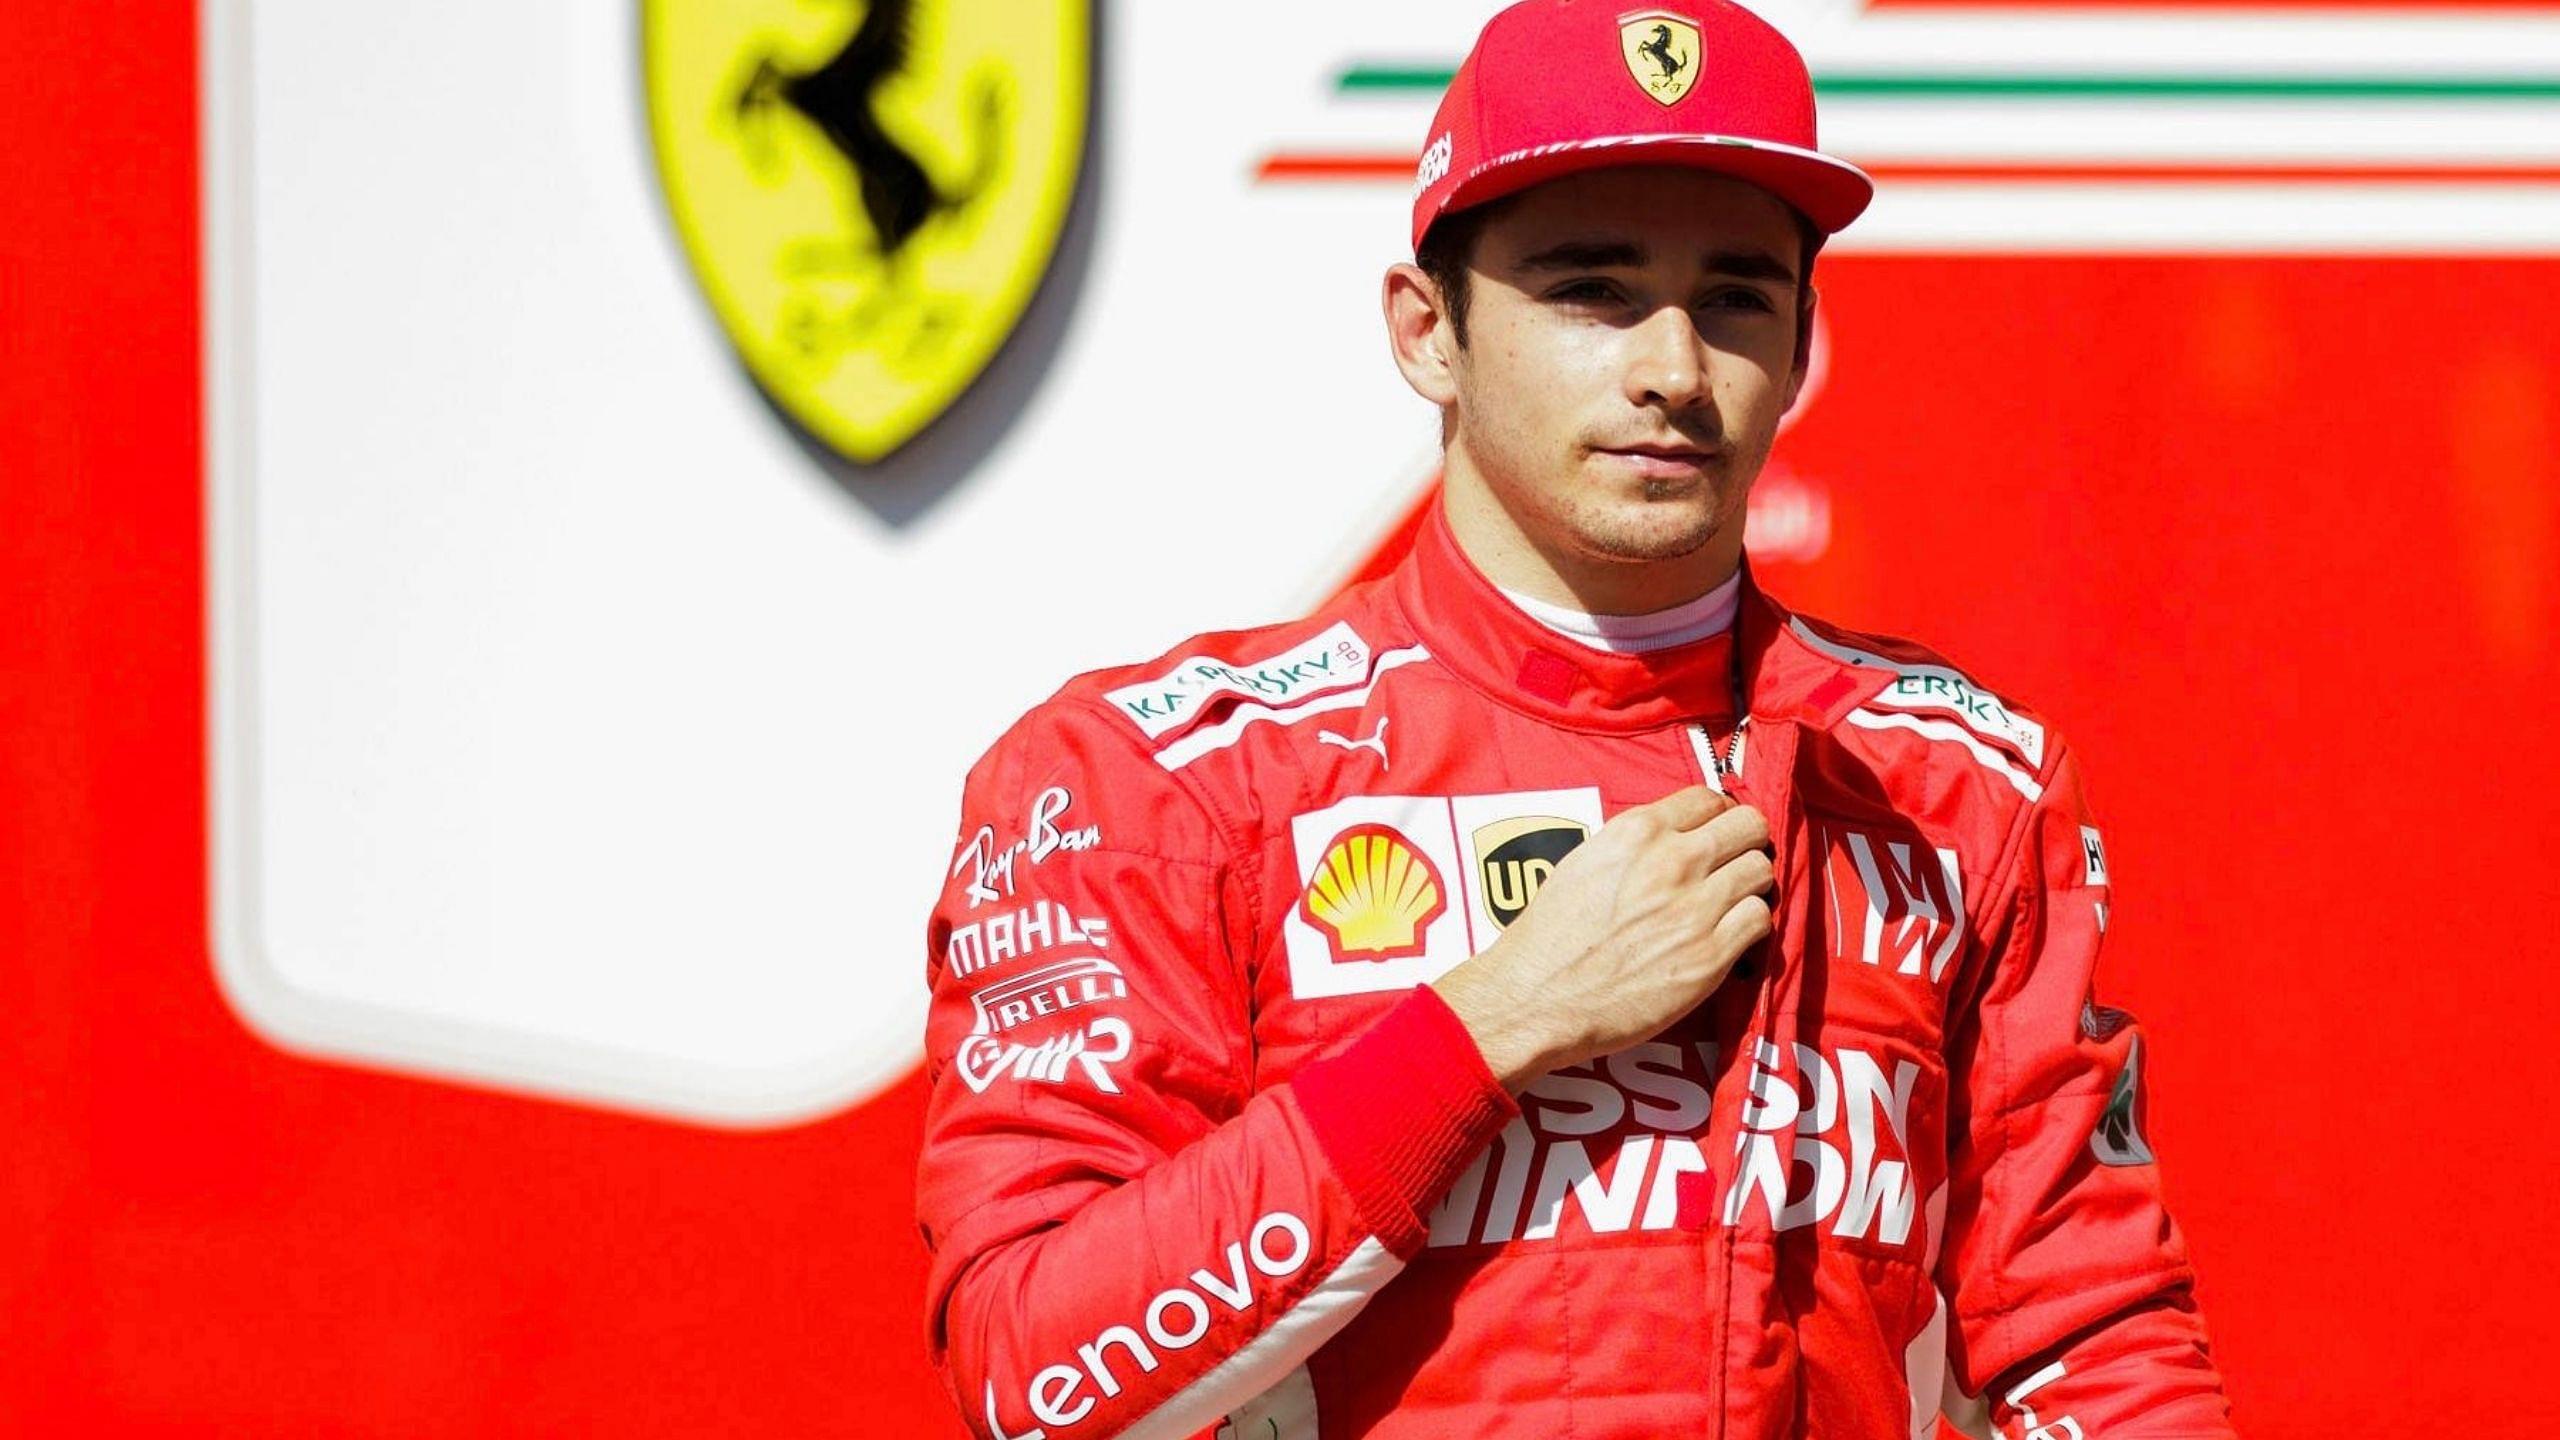 “I am feeling okay and have mild symptoms": Setback for Ferrari as Charles Leclerc tests positive for Covid-19